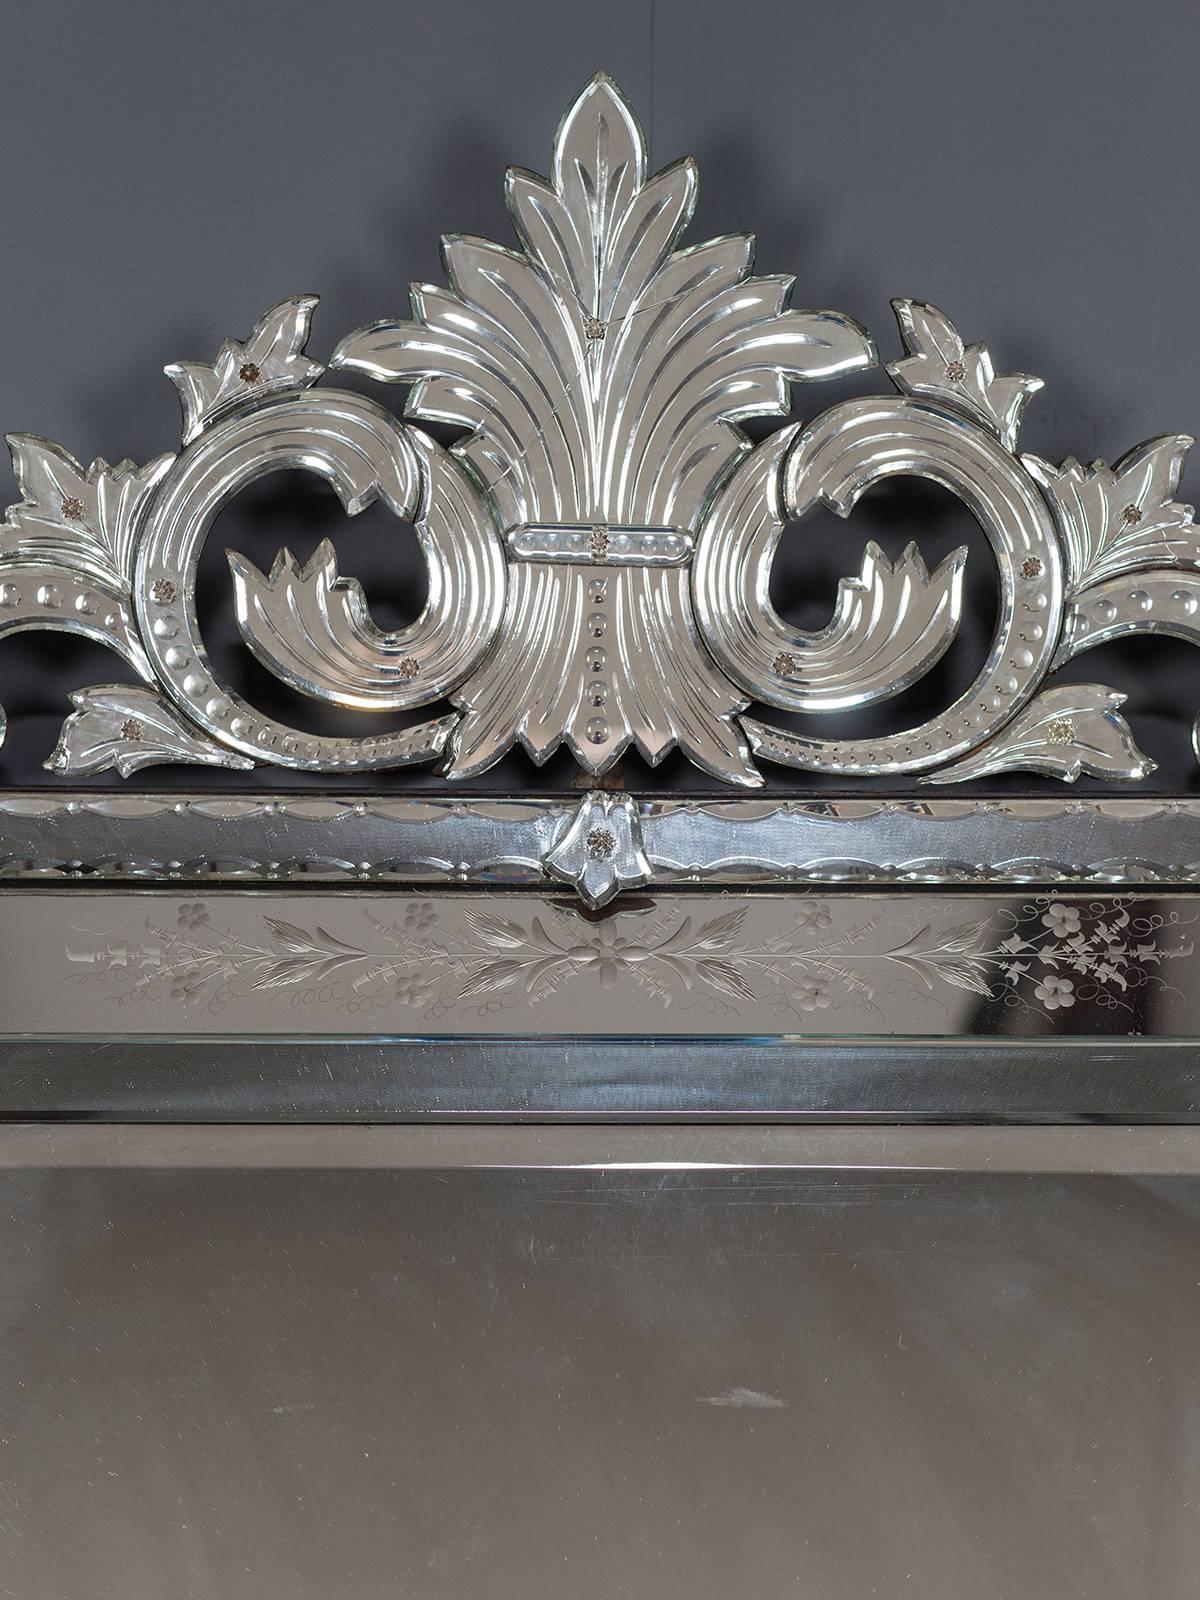 Receive our new selections direct from 1stdibs by email each week. Please click Follow Dealer below and see them first!

This beautiful antique French mirror is in the Venetian manner, circa 1890. The use of all mirror glass that covers the wooden